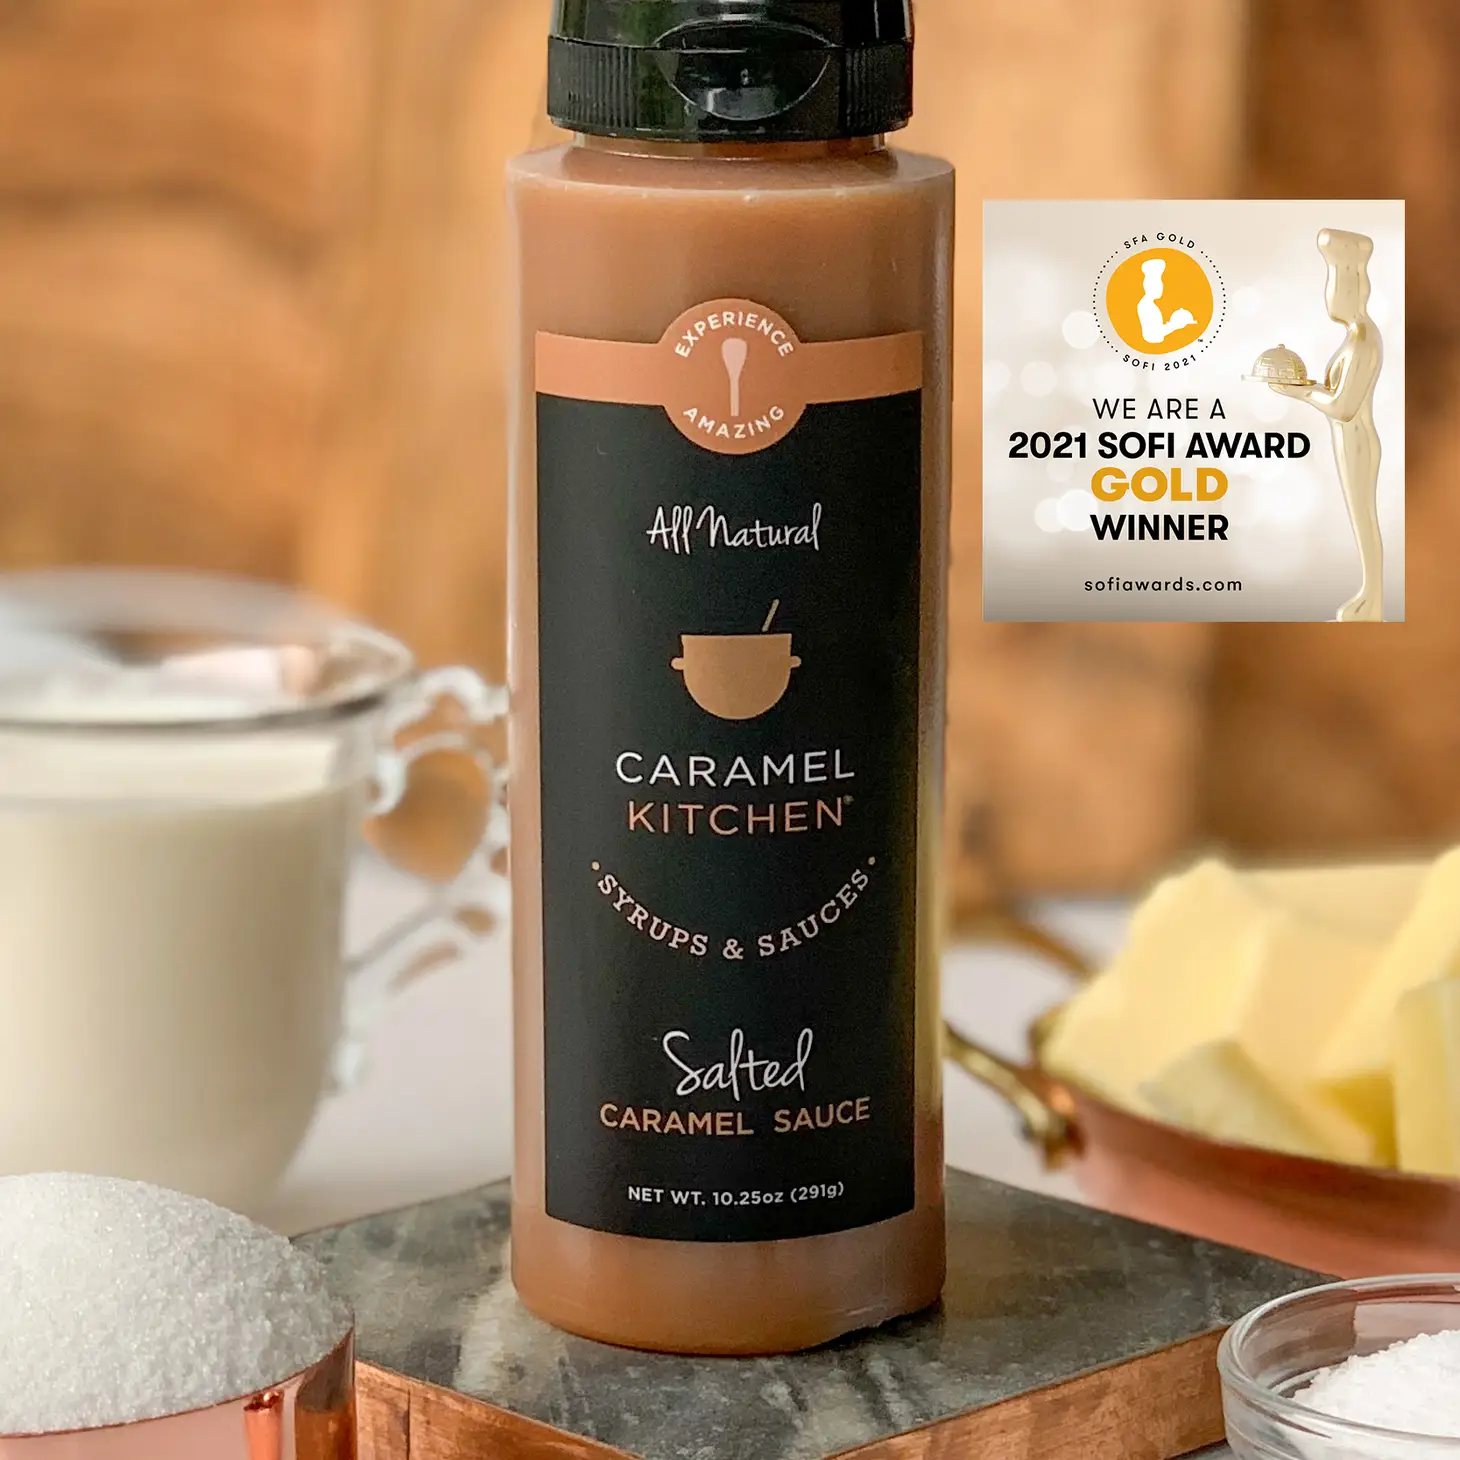 Caramel Kitchen Sauce-Salted Caramel Flavor with a glass of milk and butter in the background.  2021 SOFI  Gold Award Winner